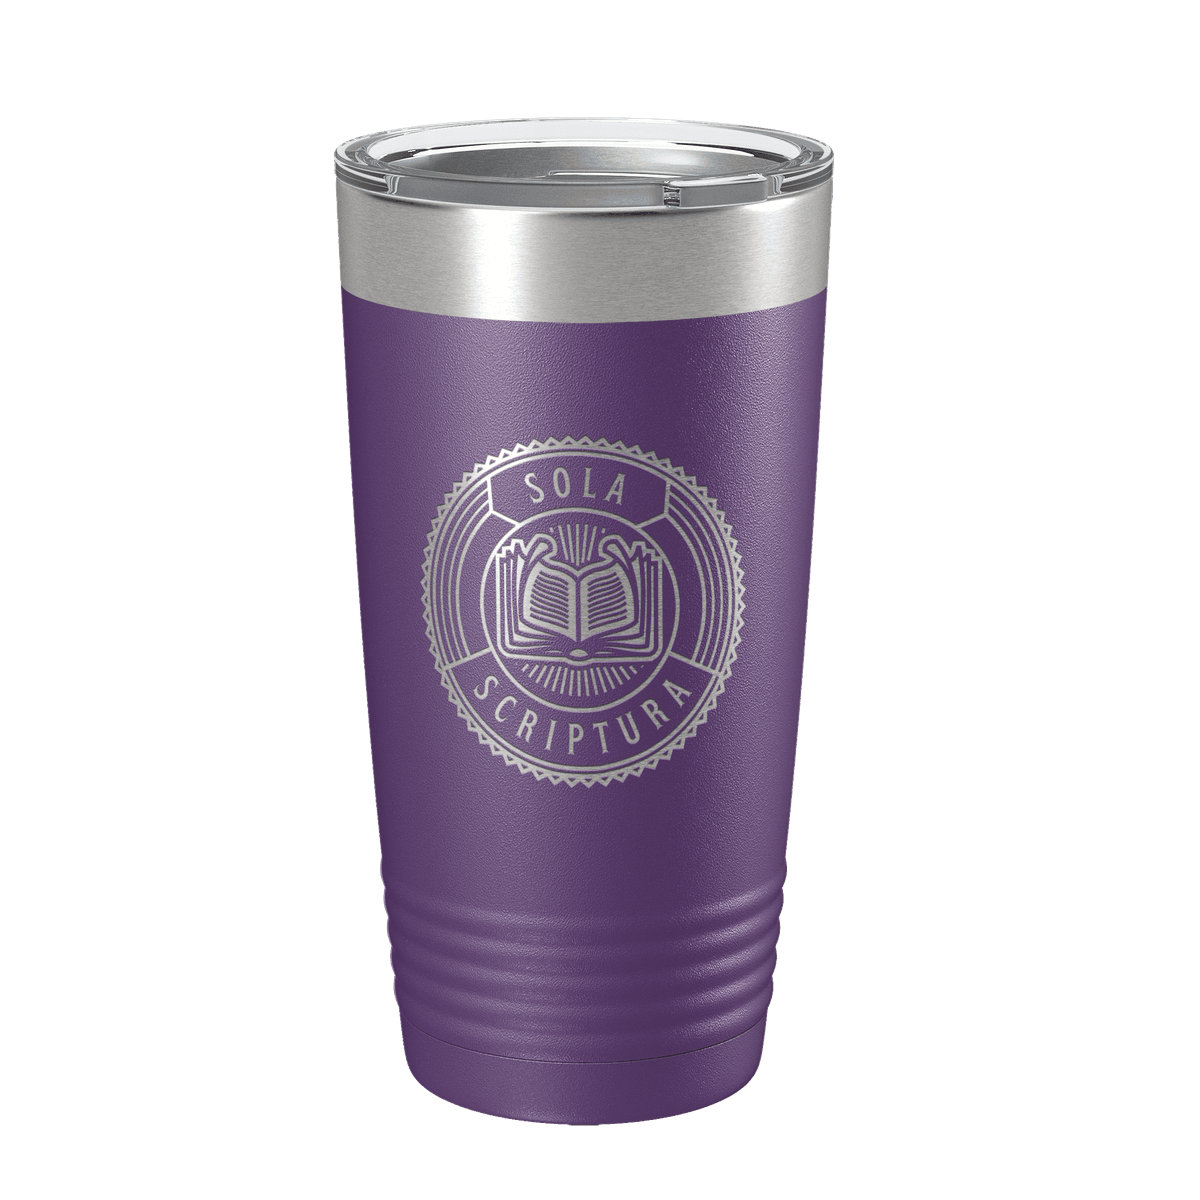 https://d11xh0uby8avni.cloudfront.net/fit-in/0x1200/products/SOLA13-tumbler20-purple.png